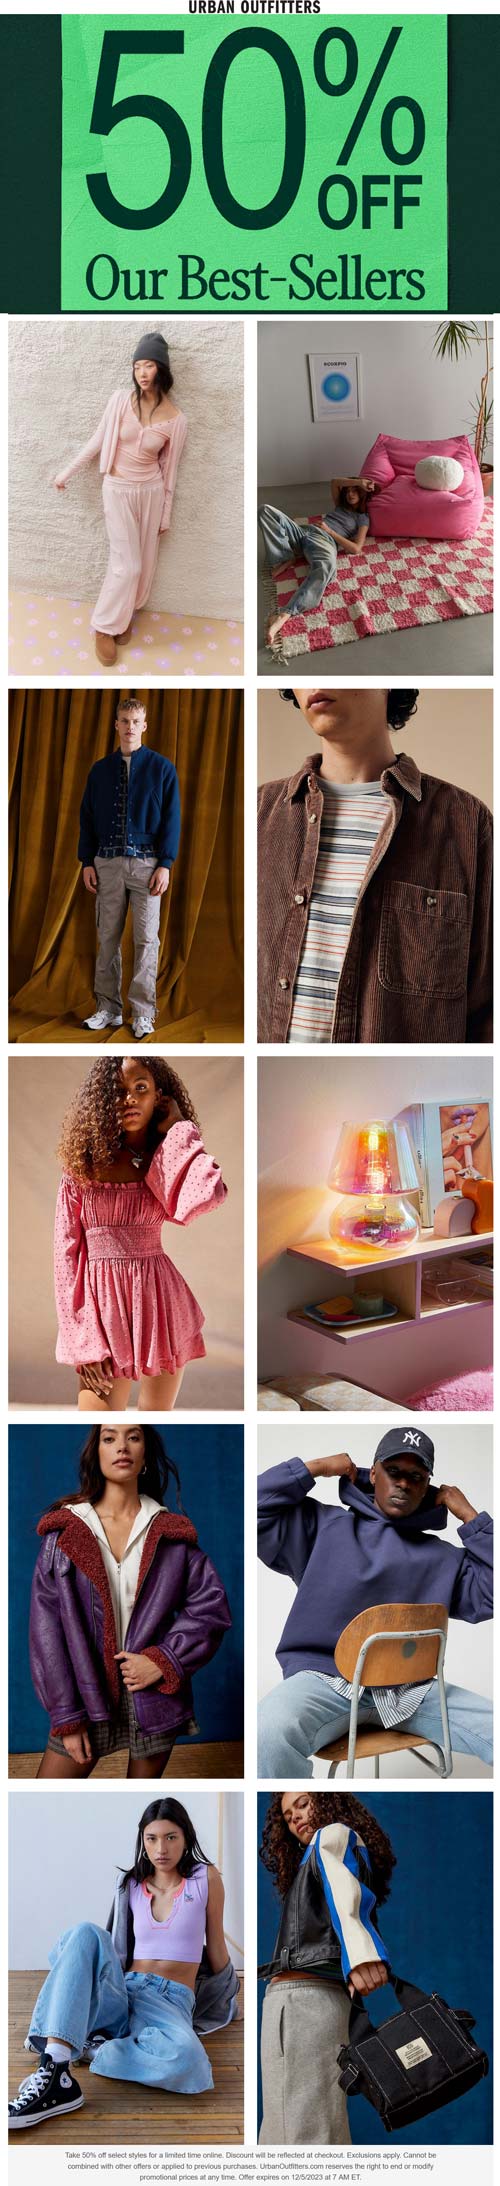 Urban Outfitters stores Coupon  50% off best sellers at Urban Outfitters #urbanoutfitters 